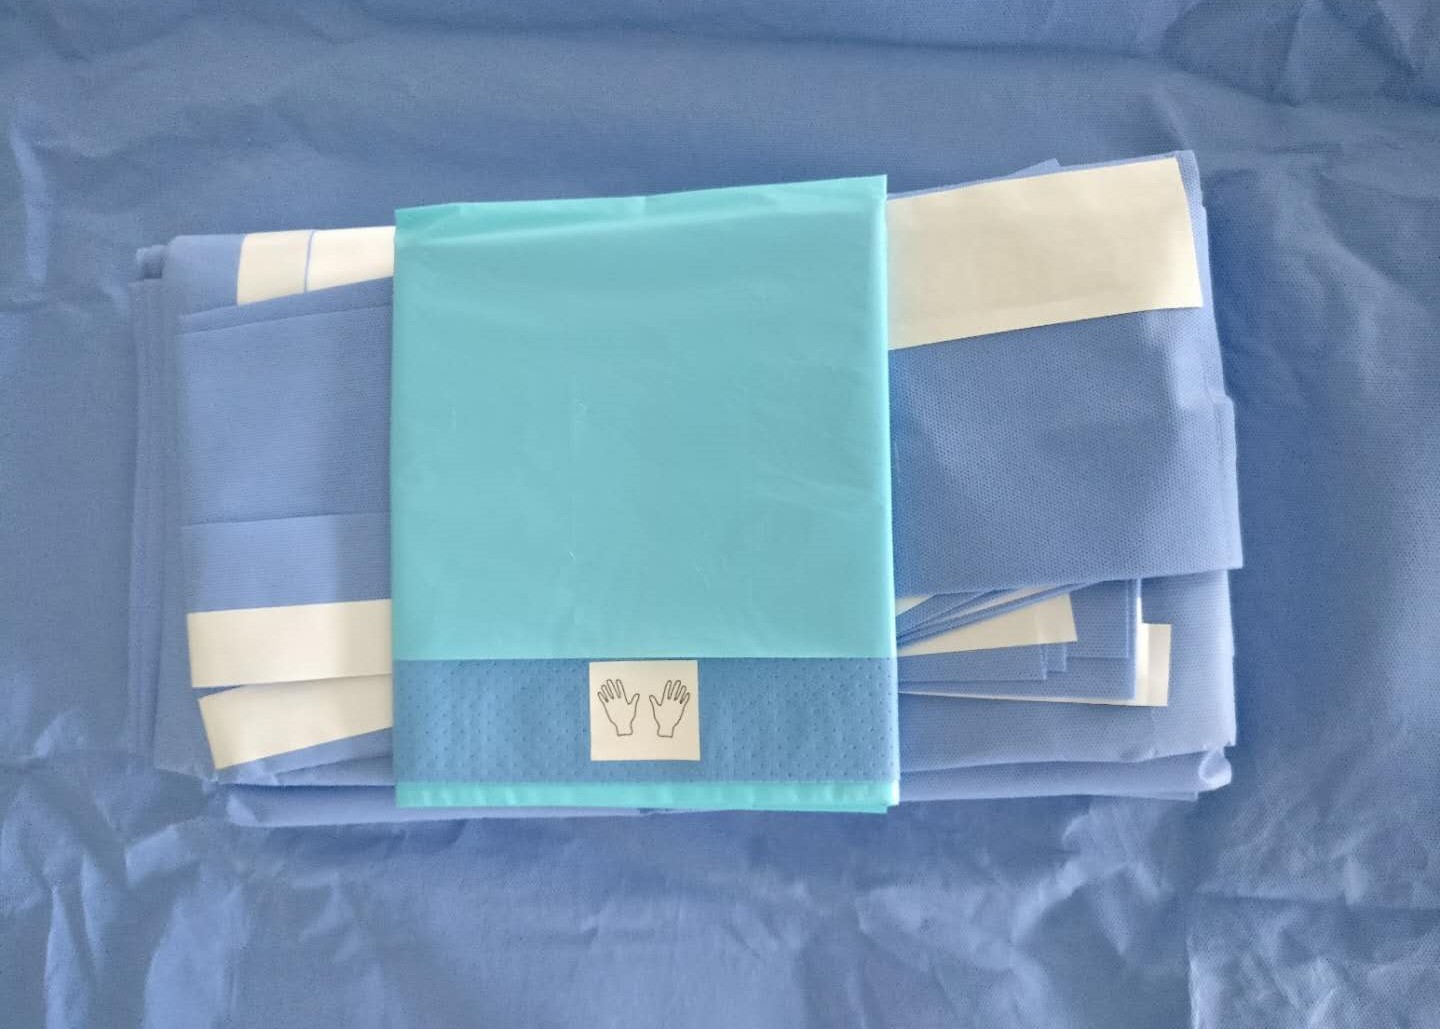  Basic Procedure Custom Surgical Packs Disposable Universal Aseptic Technique Manufactures